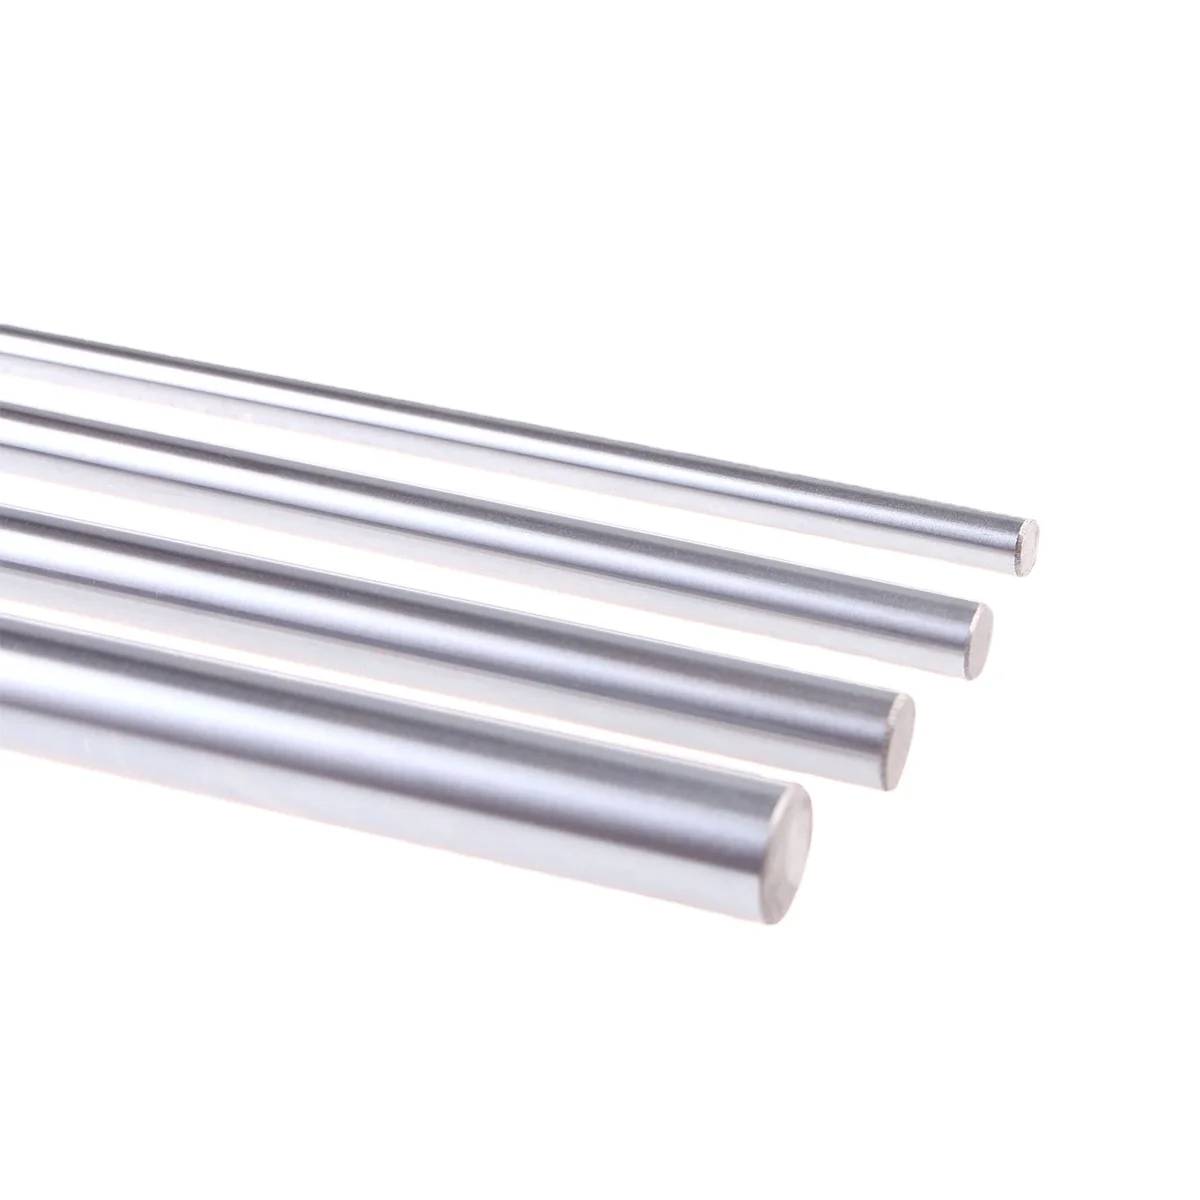 2pcs 6mm 8mm 10mm 12mm OD Linear Shaft Cylinder Rail Chrome Plated Round Smooth Rods Optical Axis for CNC 3D Printer Parts linear rail 6mm 8mm 10mm 12mm 16mm od linear shaft length 100 800mm cylinder liner rods axis rail for 3d printer axis cnc parts